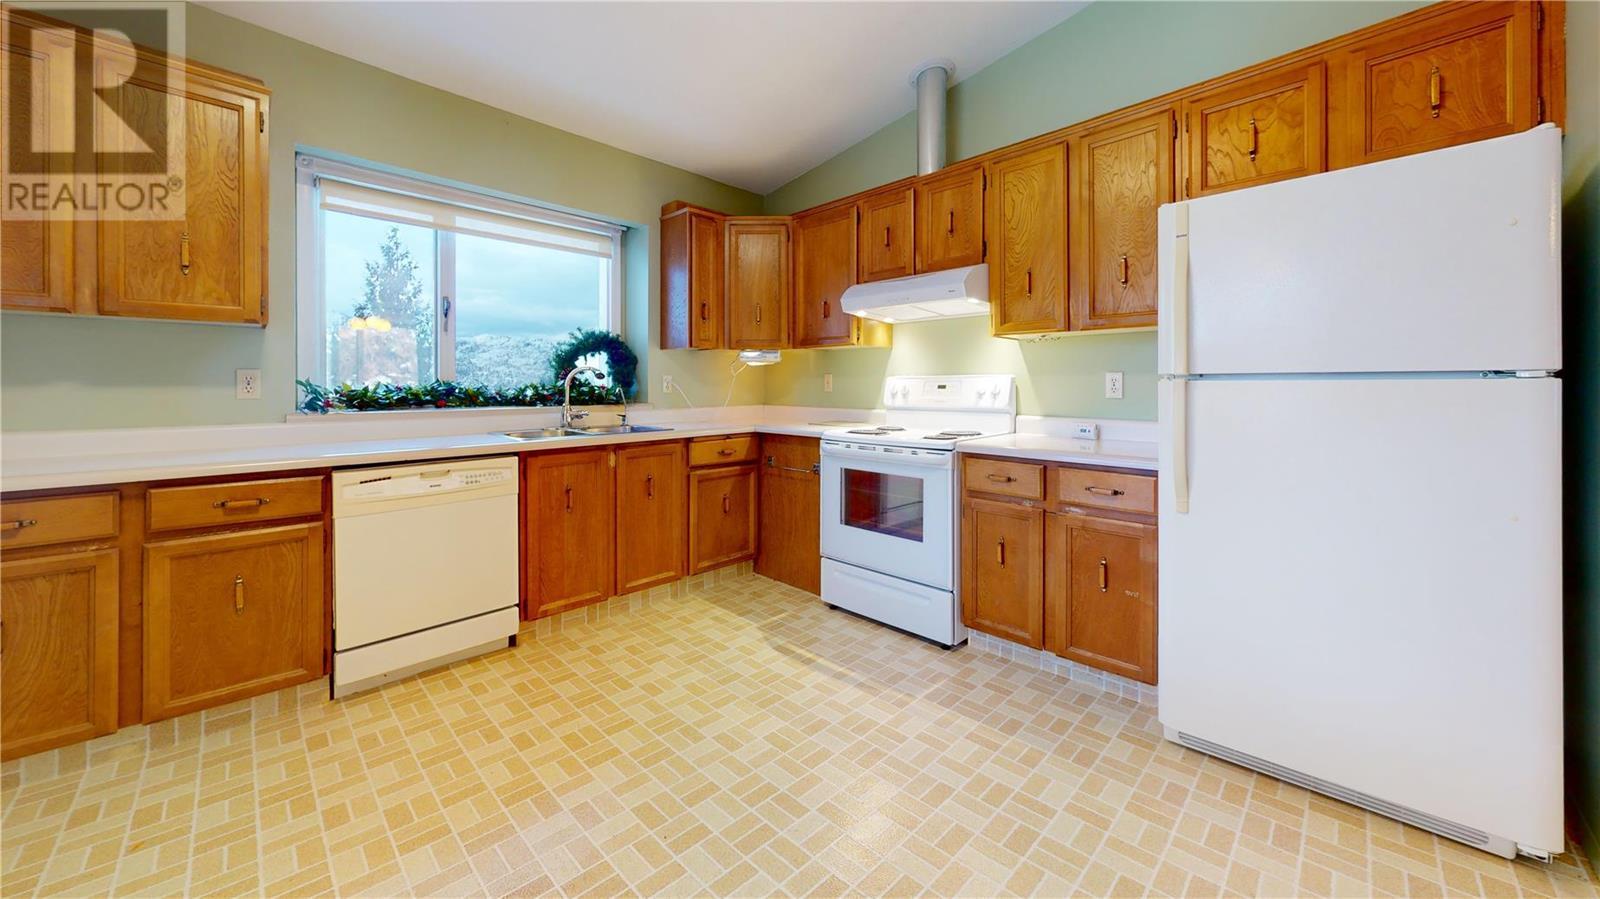      5182 Robinson Place  , Peachland, Central Okanagan,  ;  Listing Number: MLS 10268408